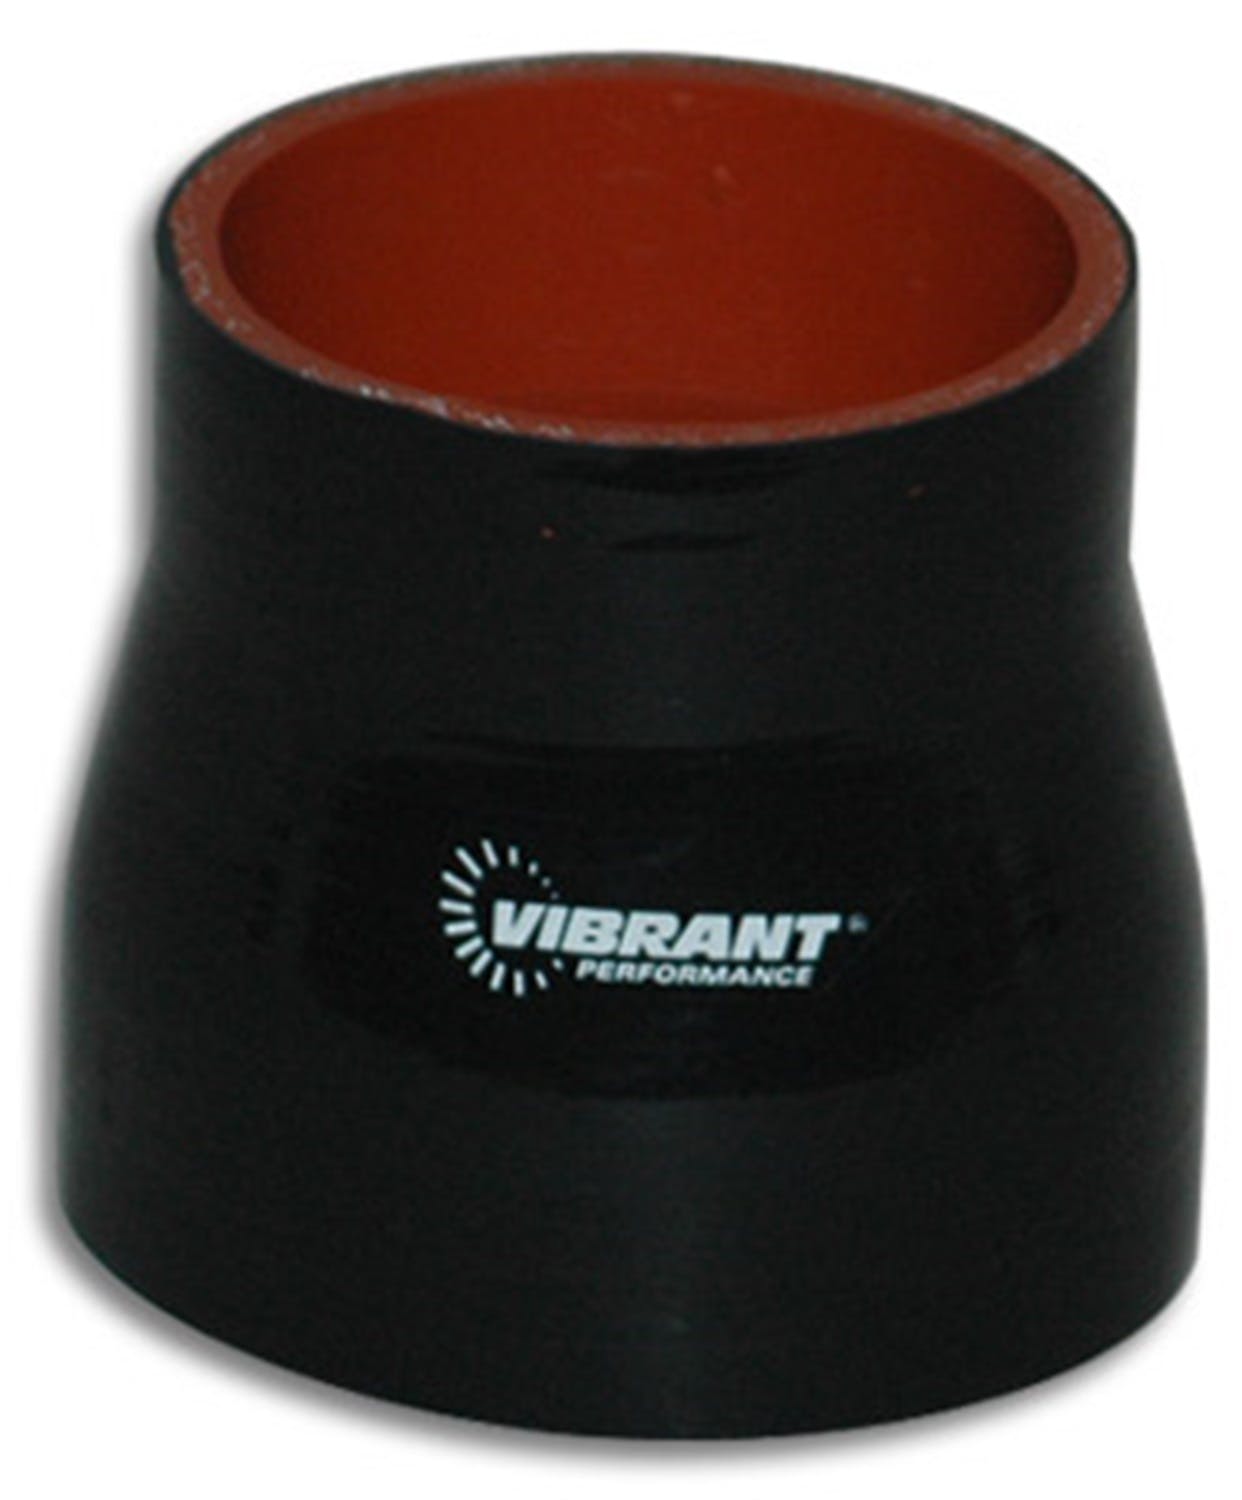 Vibrant Performance 2777 4 Ply Reducer Coupling, 4 inch x 5 inch x 3 inch Long - Black